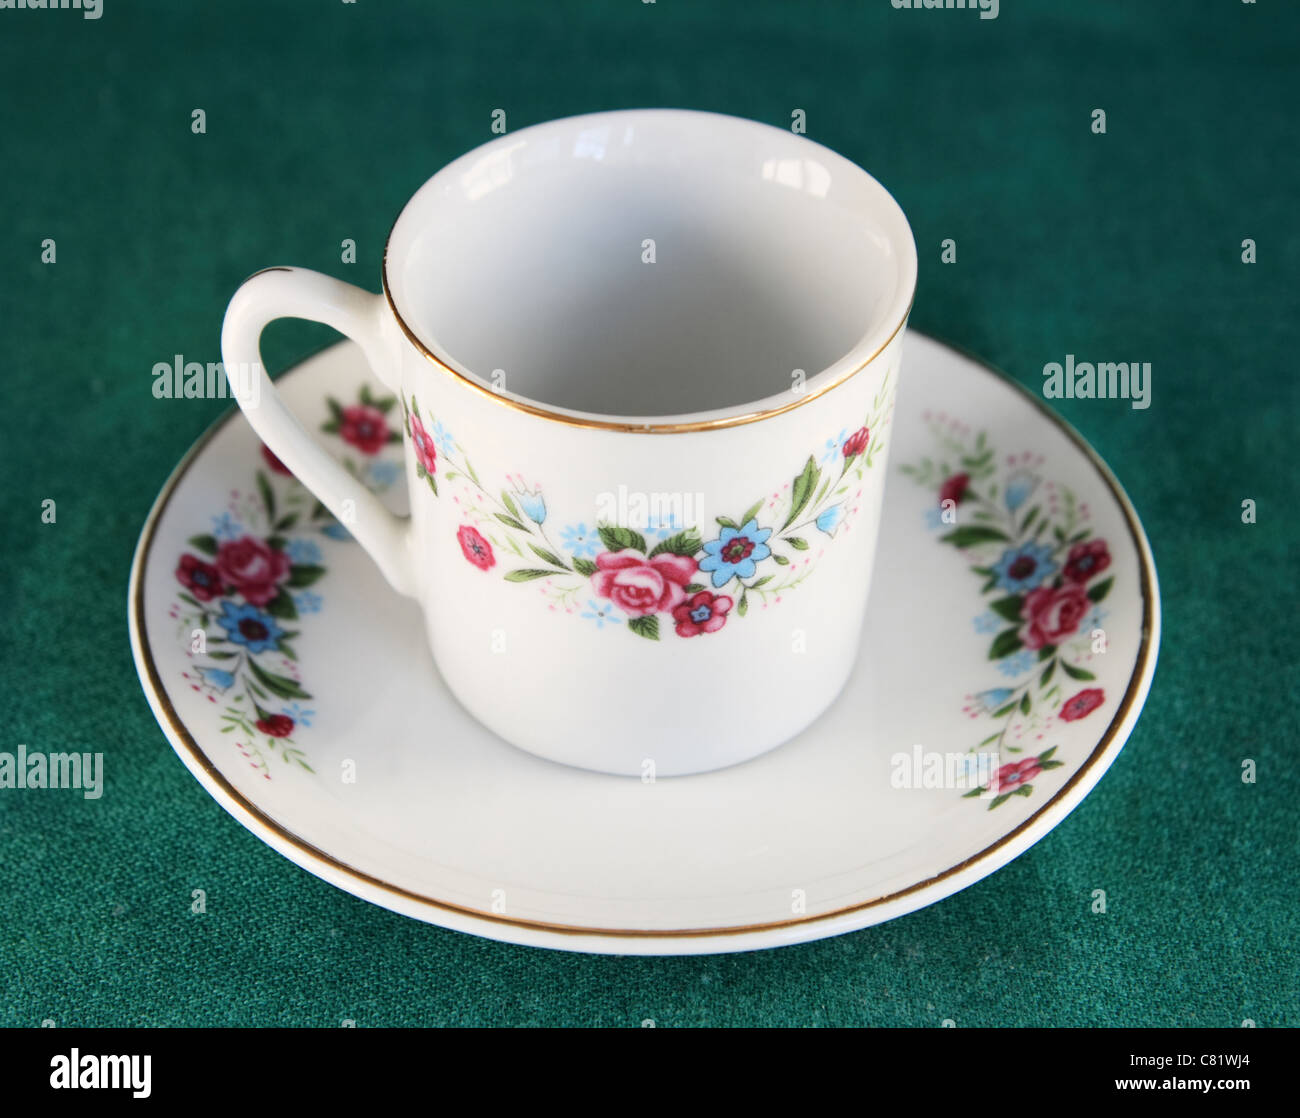 antique teacup and saucer on a green background Stock Photo